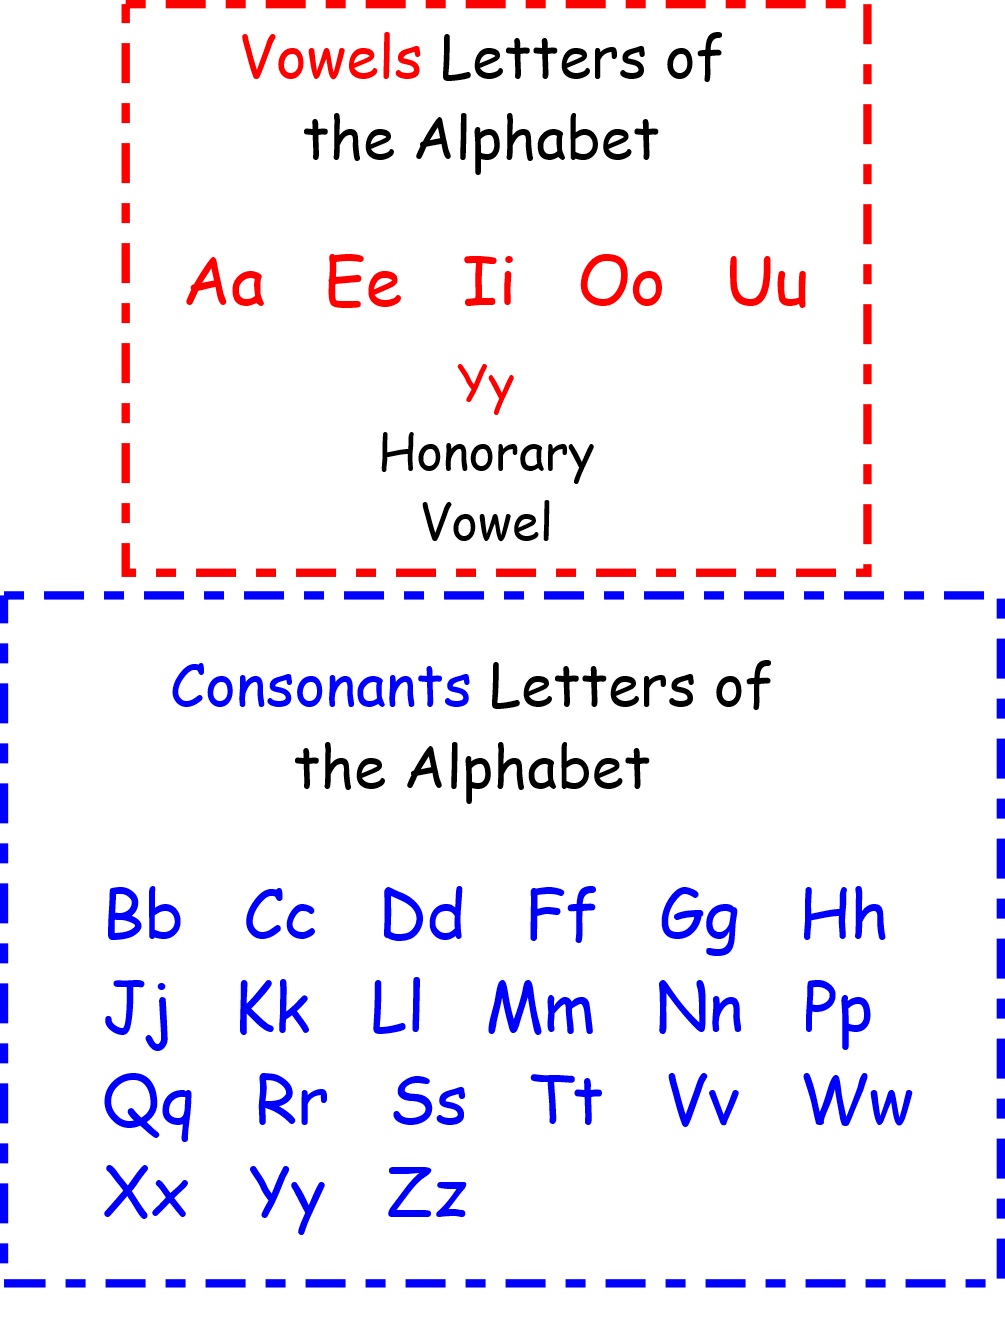 What are Vowels and Consonants?